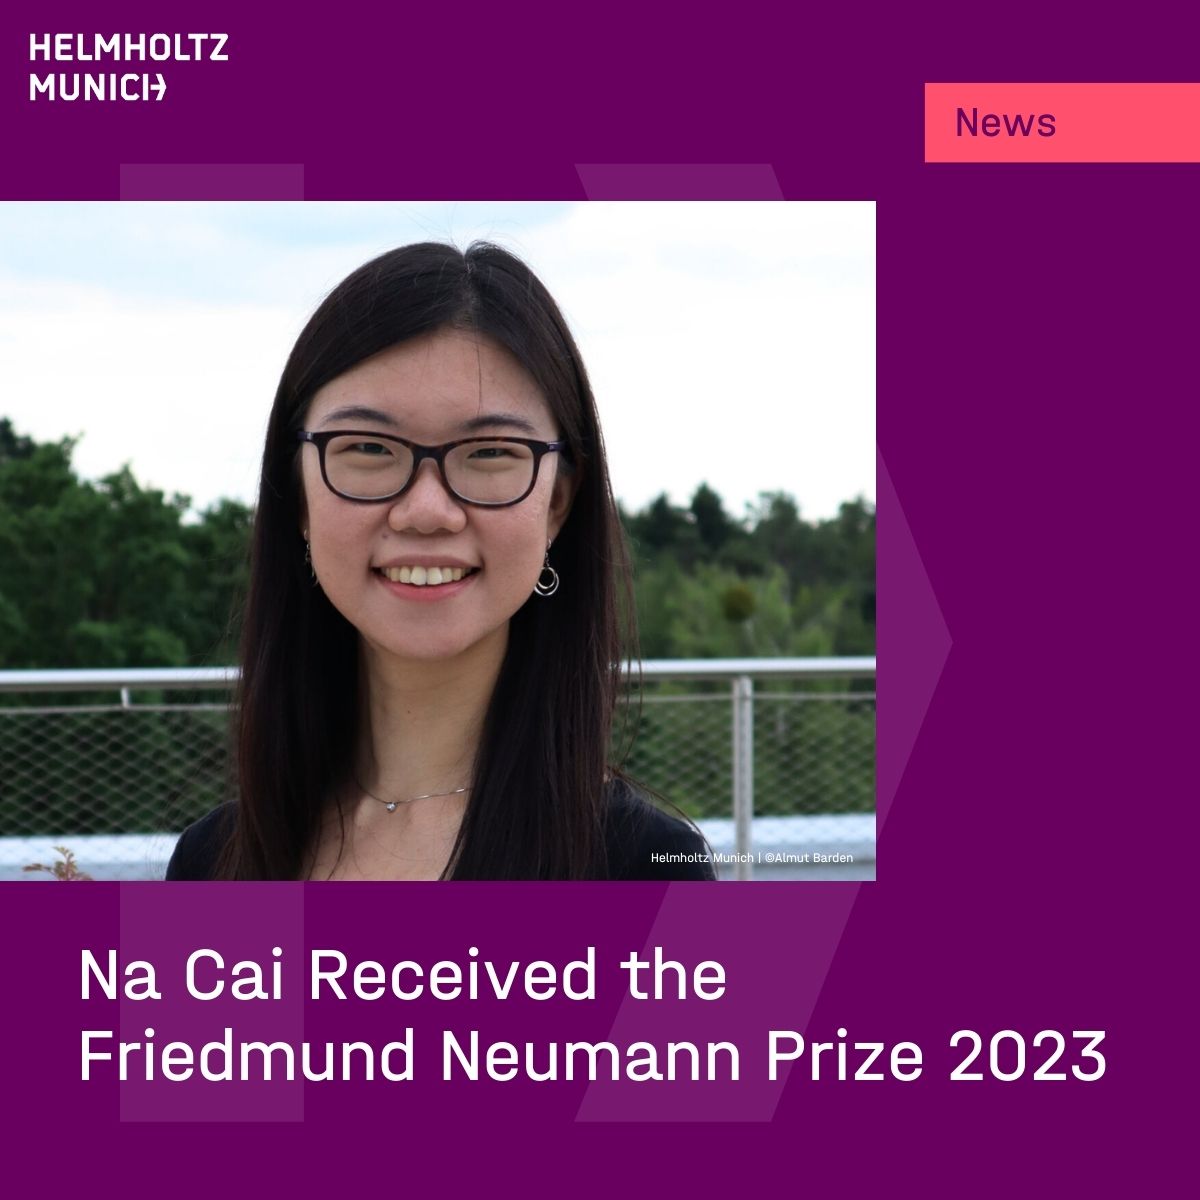 👏Congrats to #HelmholtzMunich expert Na Cai on winning the 𝗙𝗿𝗶𝗲𝗱𝗺𝘂𝗻𝗱 𝗡𝗲𝘂𝗺𝗮𝗻𝗻 Prize 2023 @ScheringStiftg for her outstanding work in the field of psychiatric #genetics!
#Depression #Neuropsychiatric #MajorDepressiveDisorder
👉More about Na: t1p.de/7l5jx